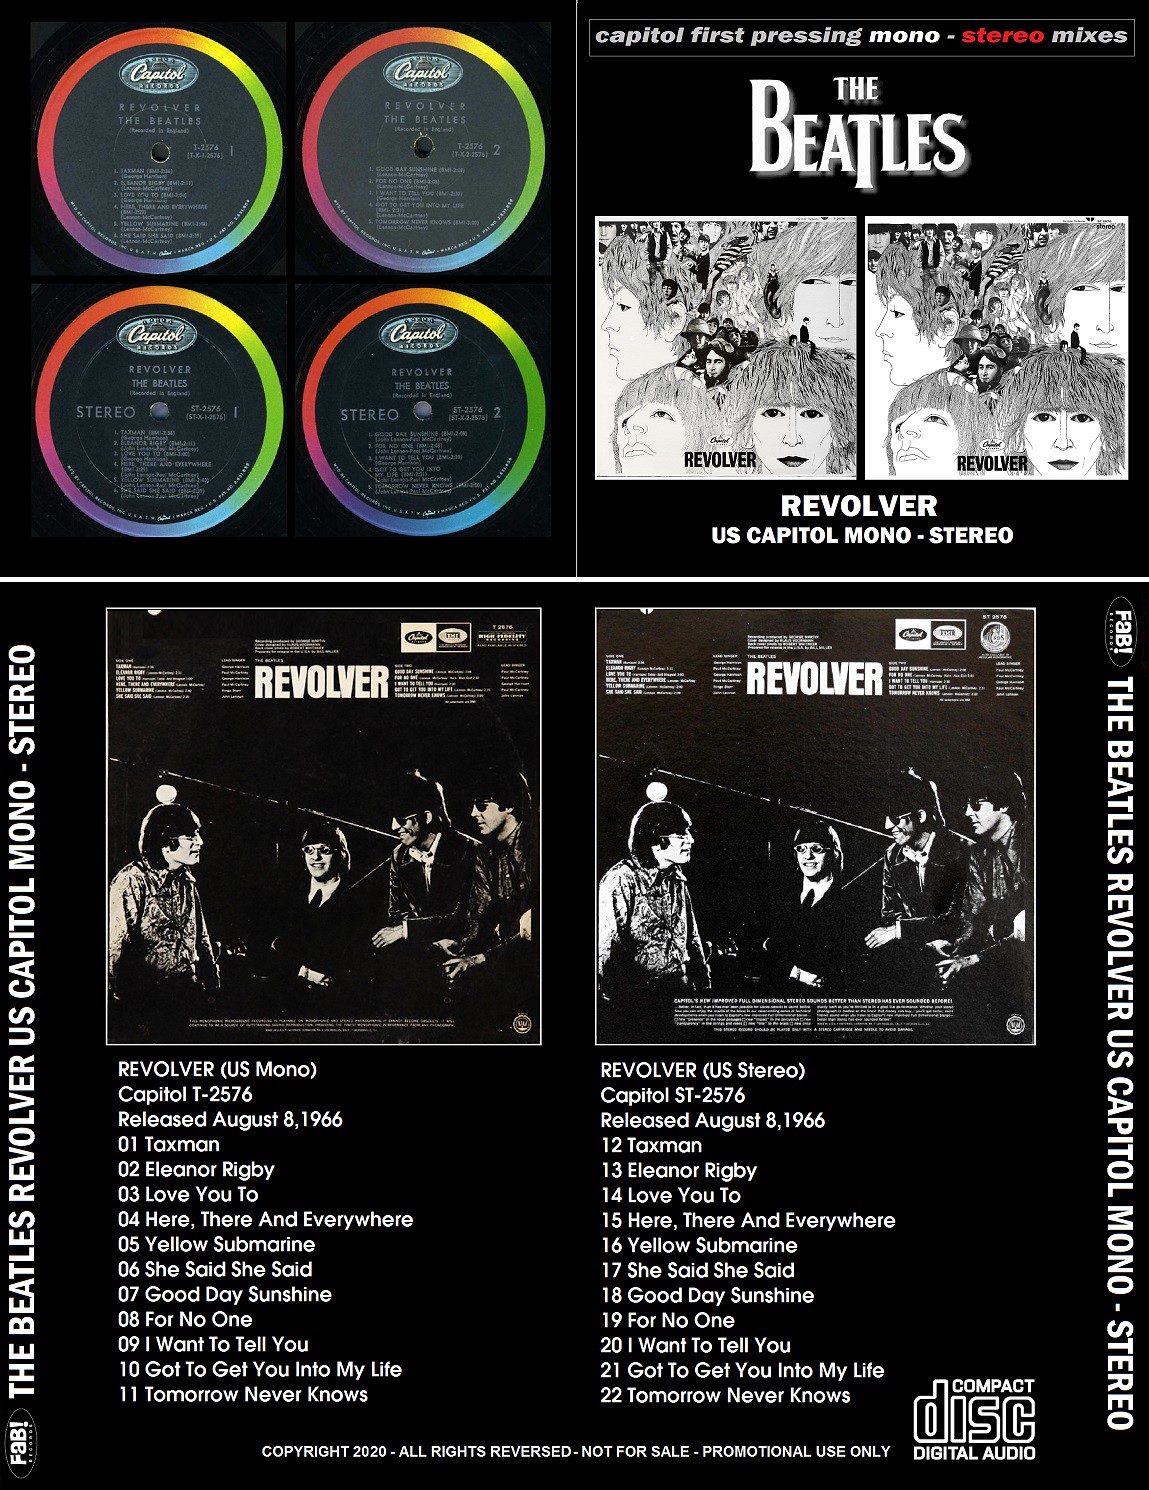 The Beatles - Revolver US Capitol Mono - Stereo - Front & Back.jpg